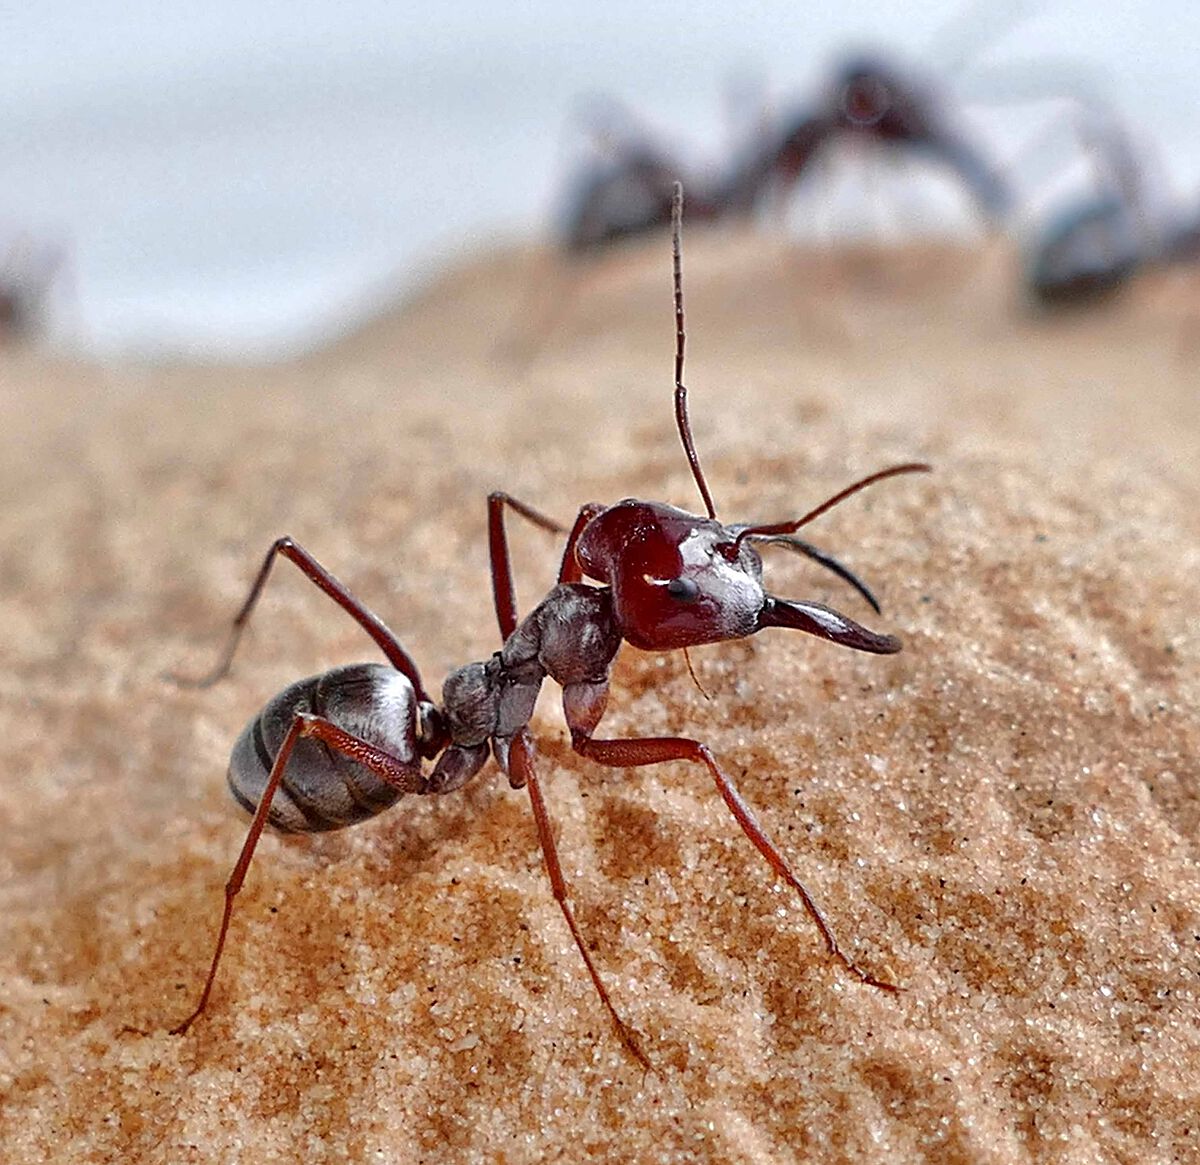 Saharan silver ant (Cataglyphis bombycina) workers at the nest entrance. (Photo: Harald Wolf)